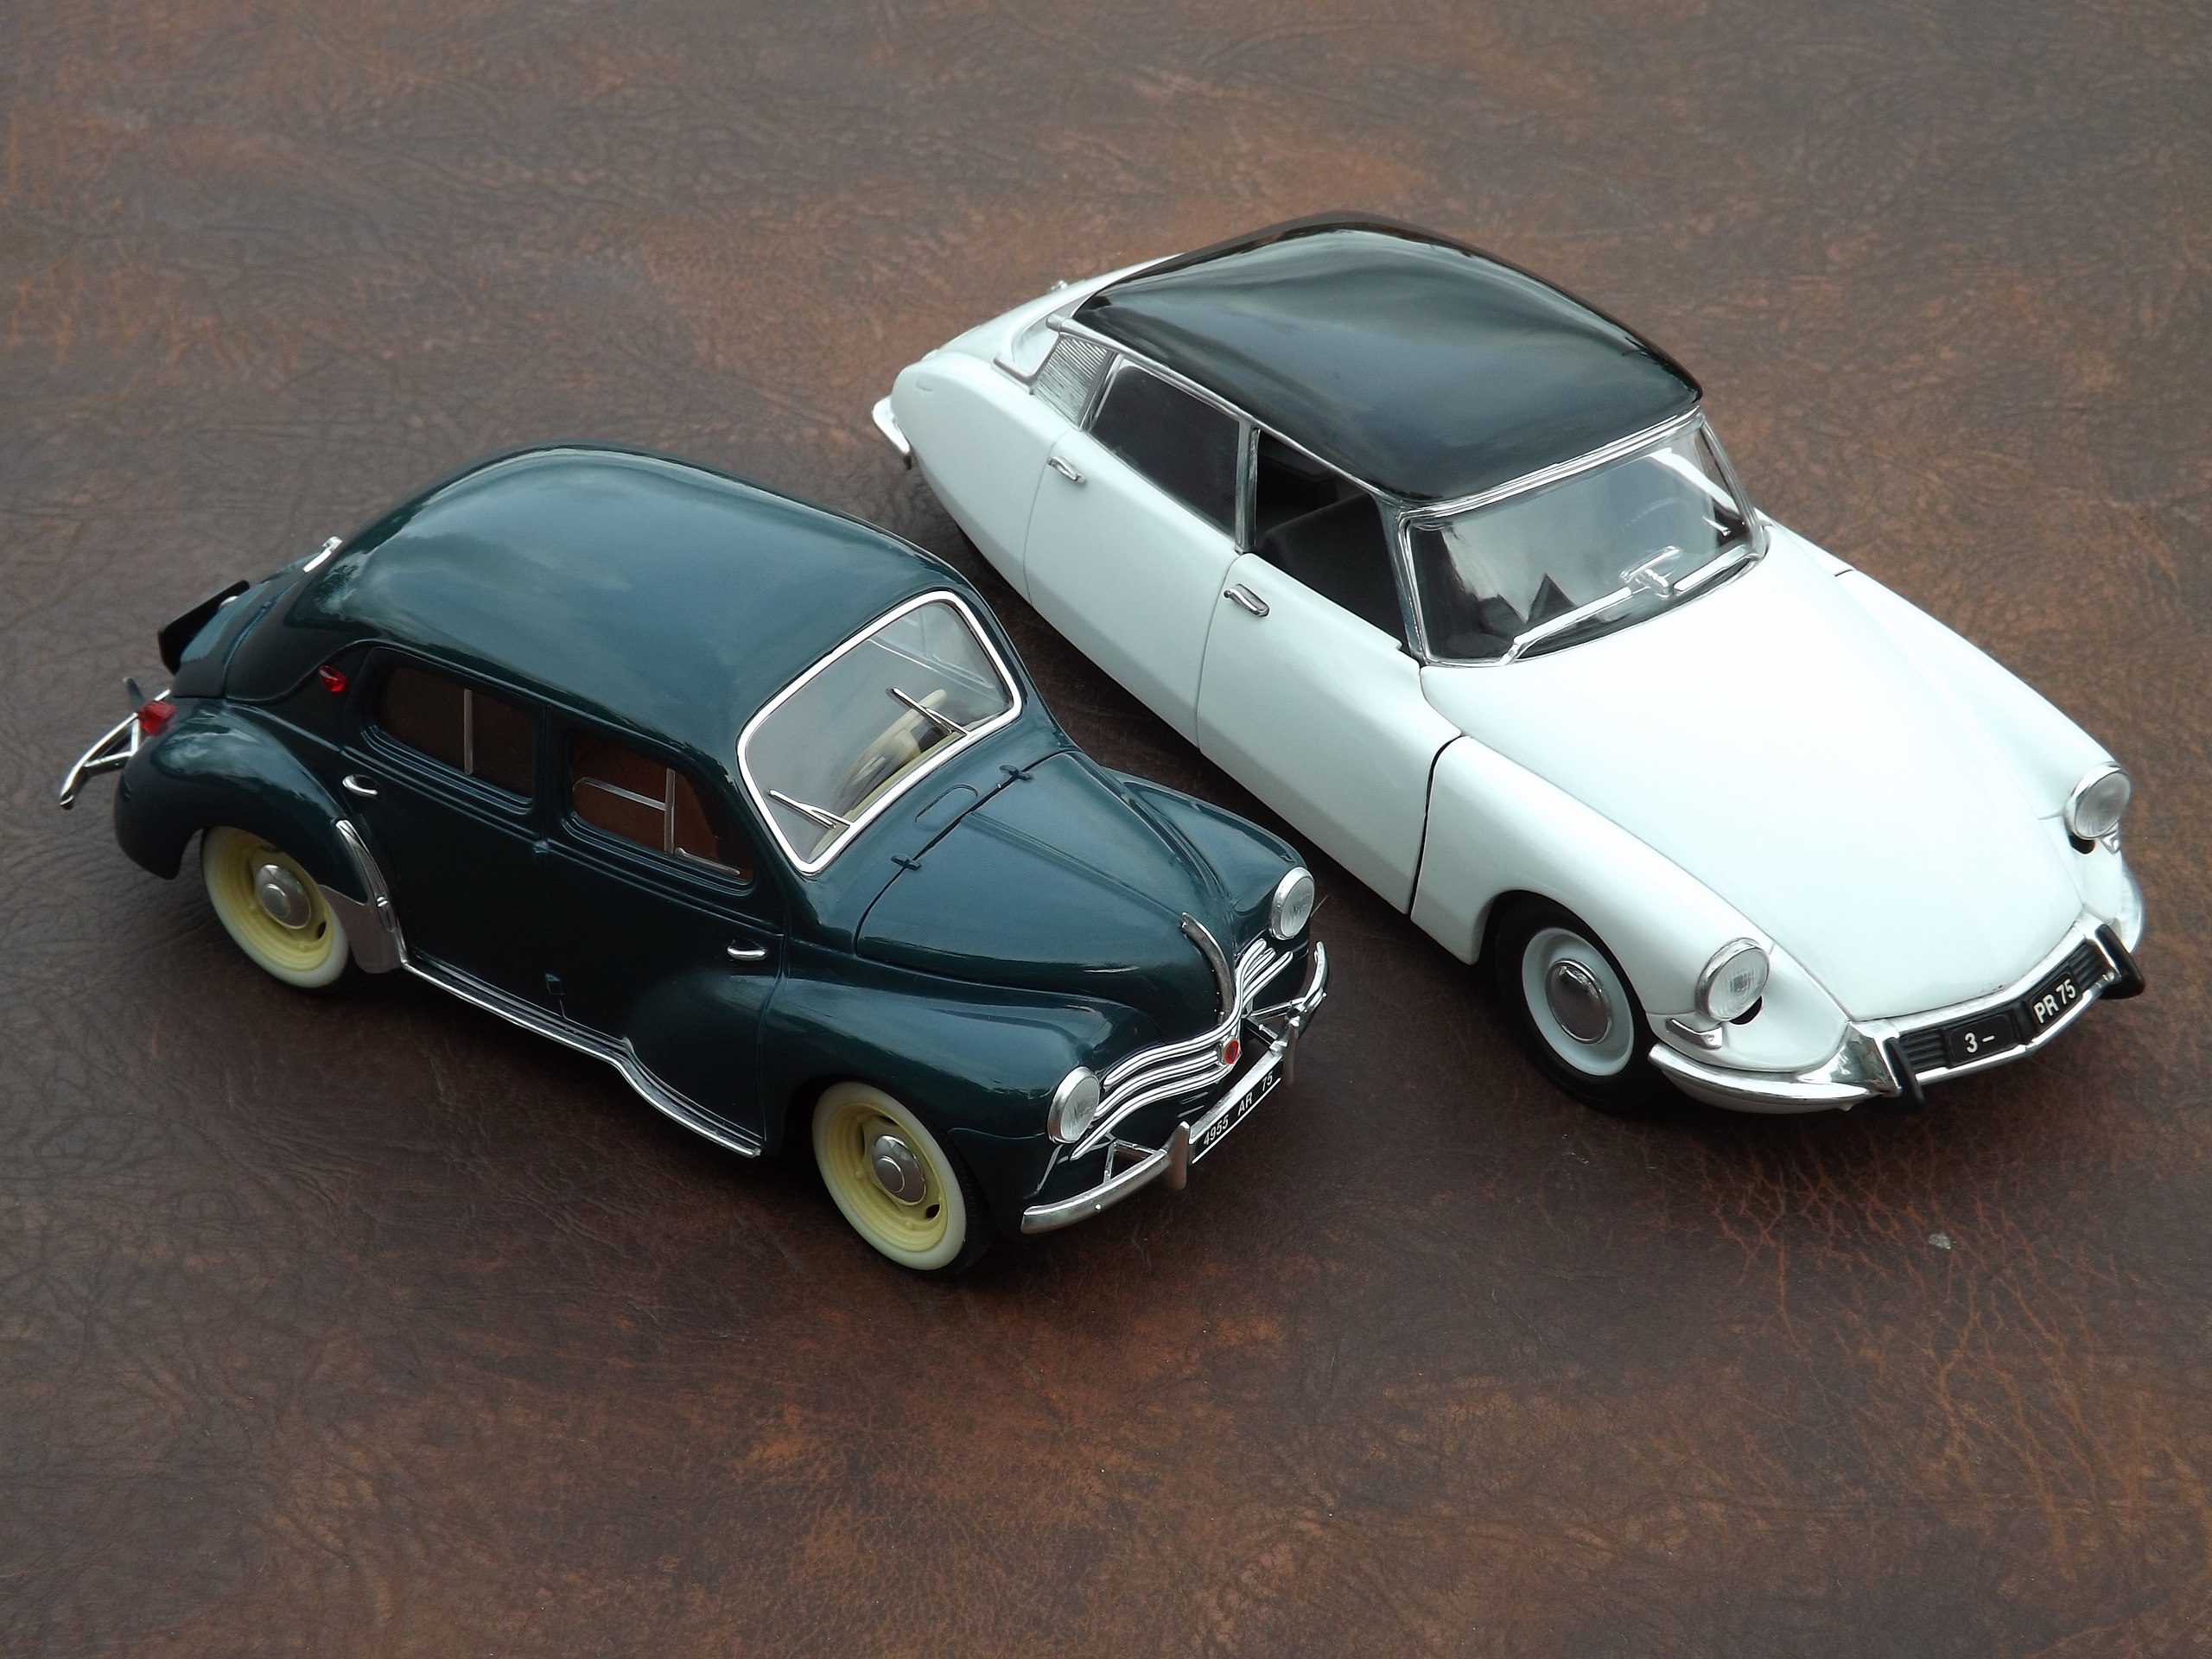 File:Renault 4CV (1955) in 1-18 scale by Solido in their Prestige series  (15264509698).jpg - Wikimedia Commons